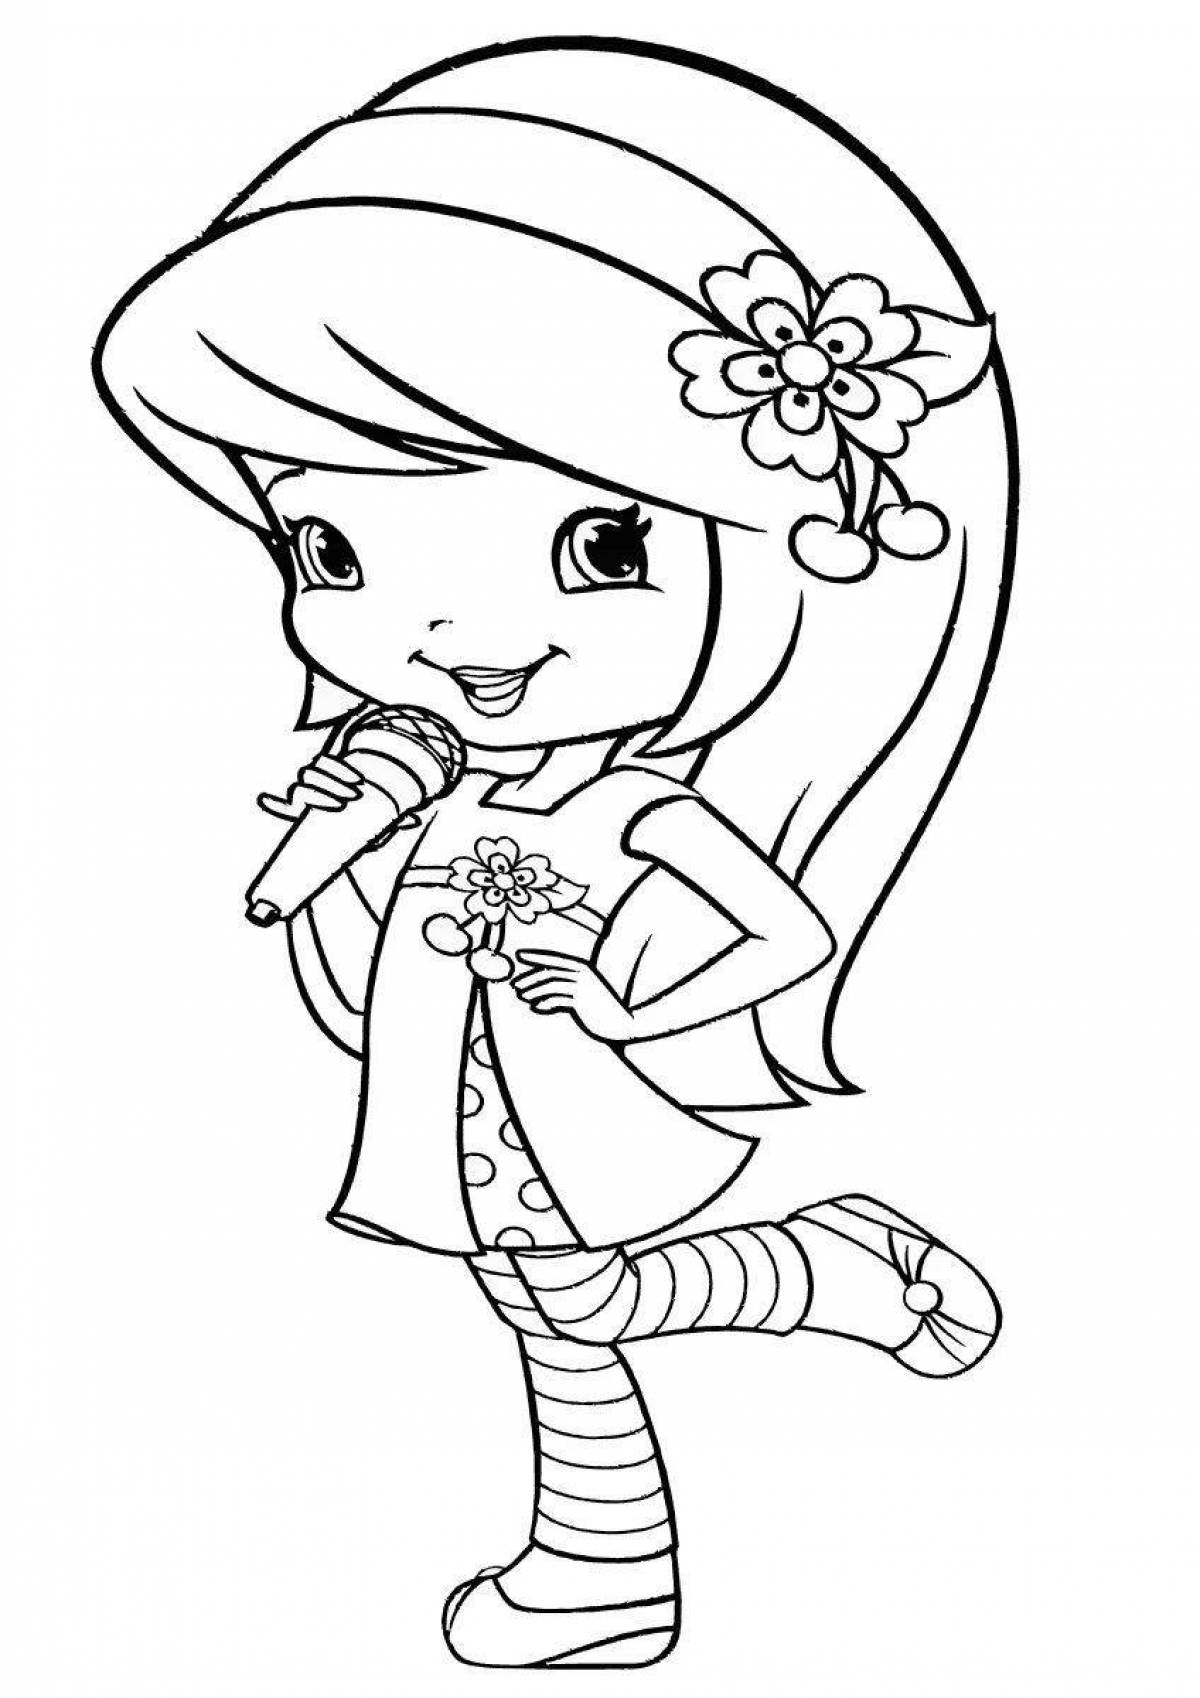 Joyful coloring girl with a microphone